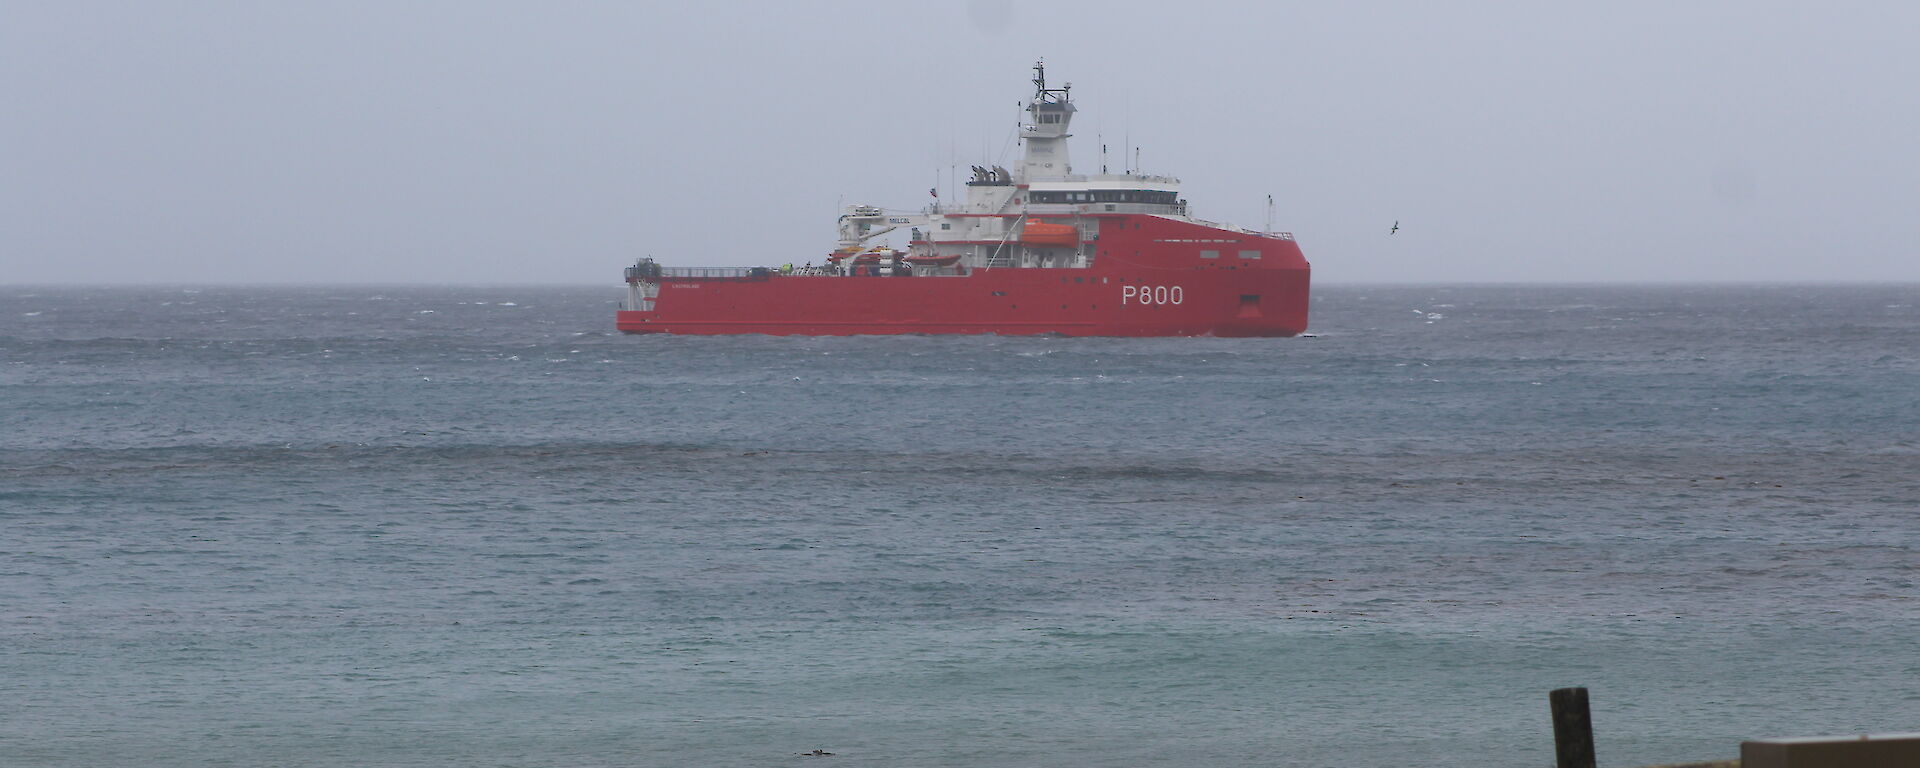 L'Astrolabe sailing past Garden Bay to take up position in Buckles Bay ready for passenger and cargo transfers